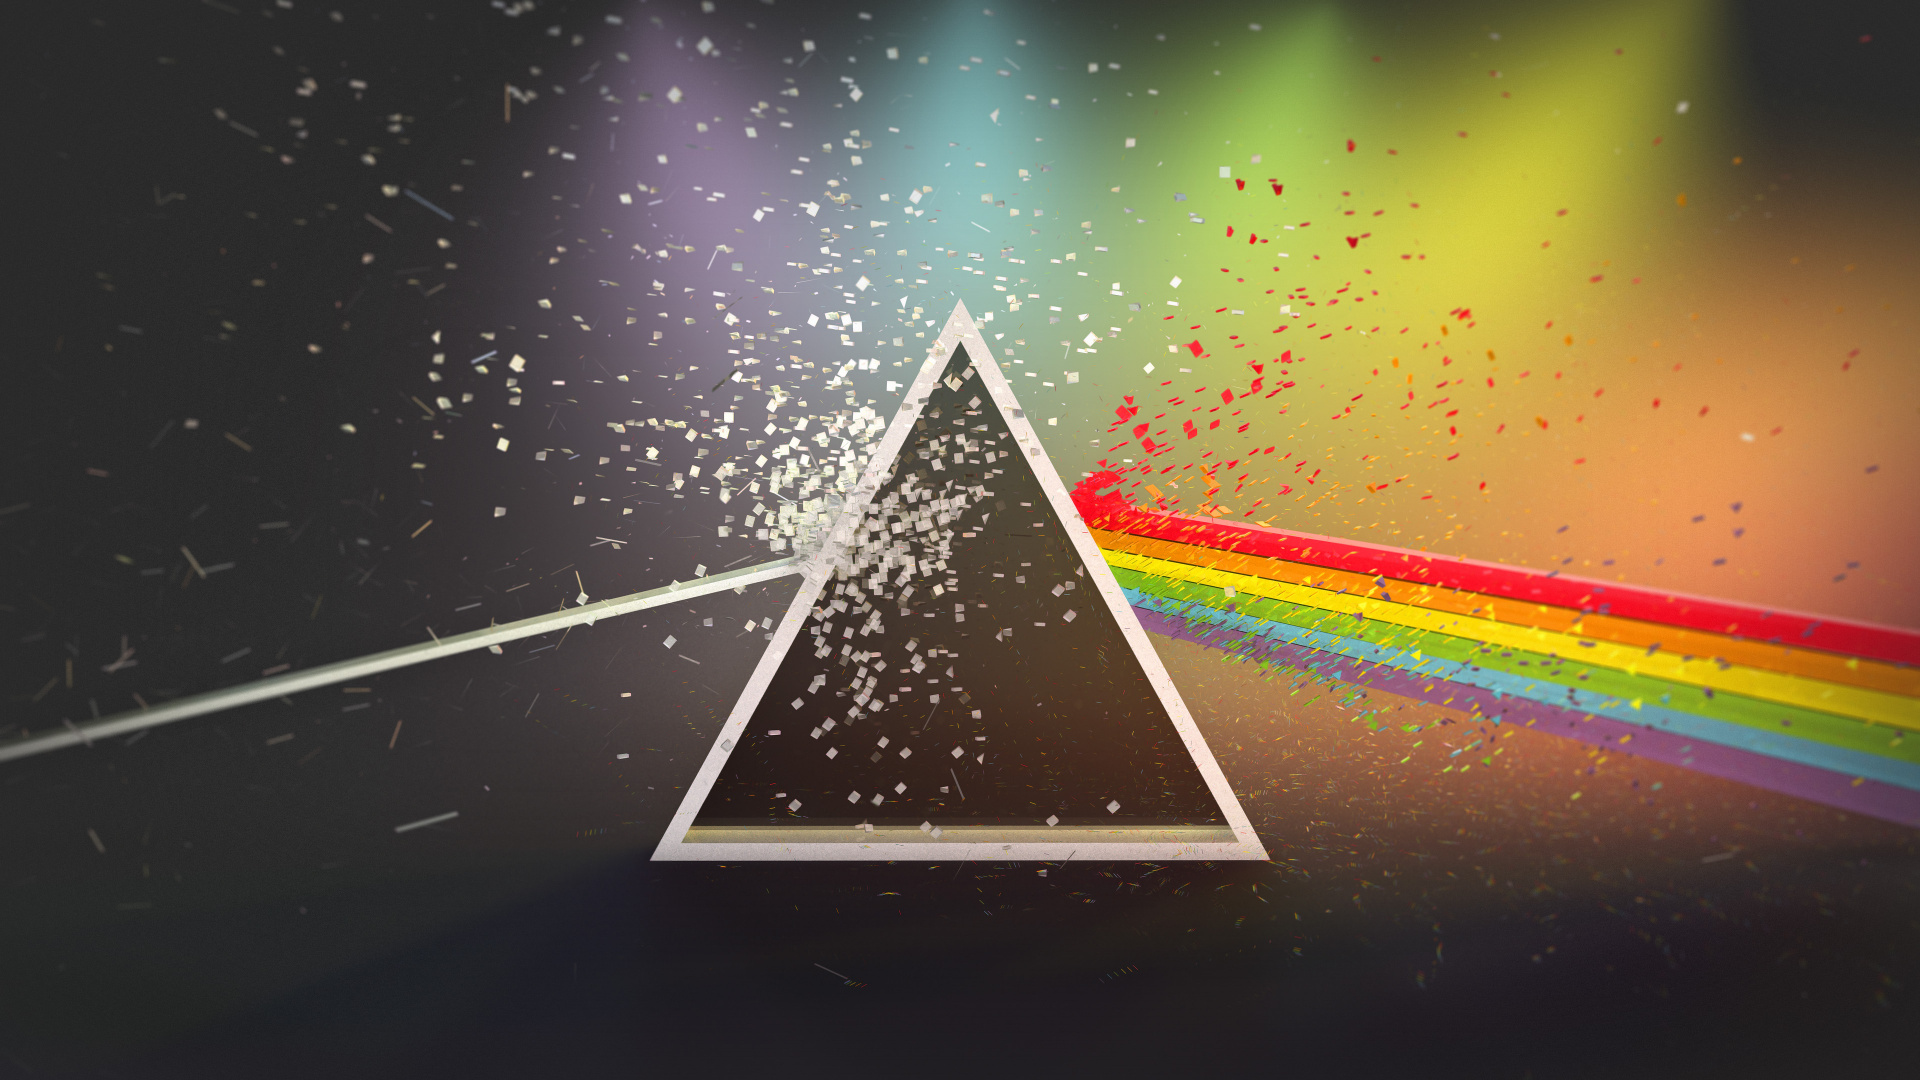 Pink Floyd, The Dark Side of The Moon, Animals, Triangle, Graphic Design. Wallpaper in 1920x1080 Resolution